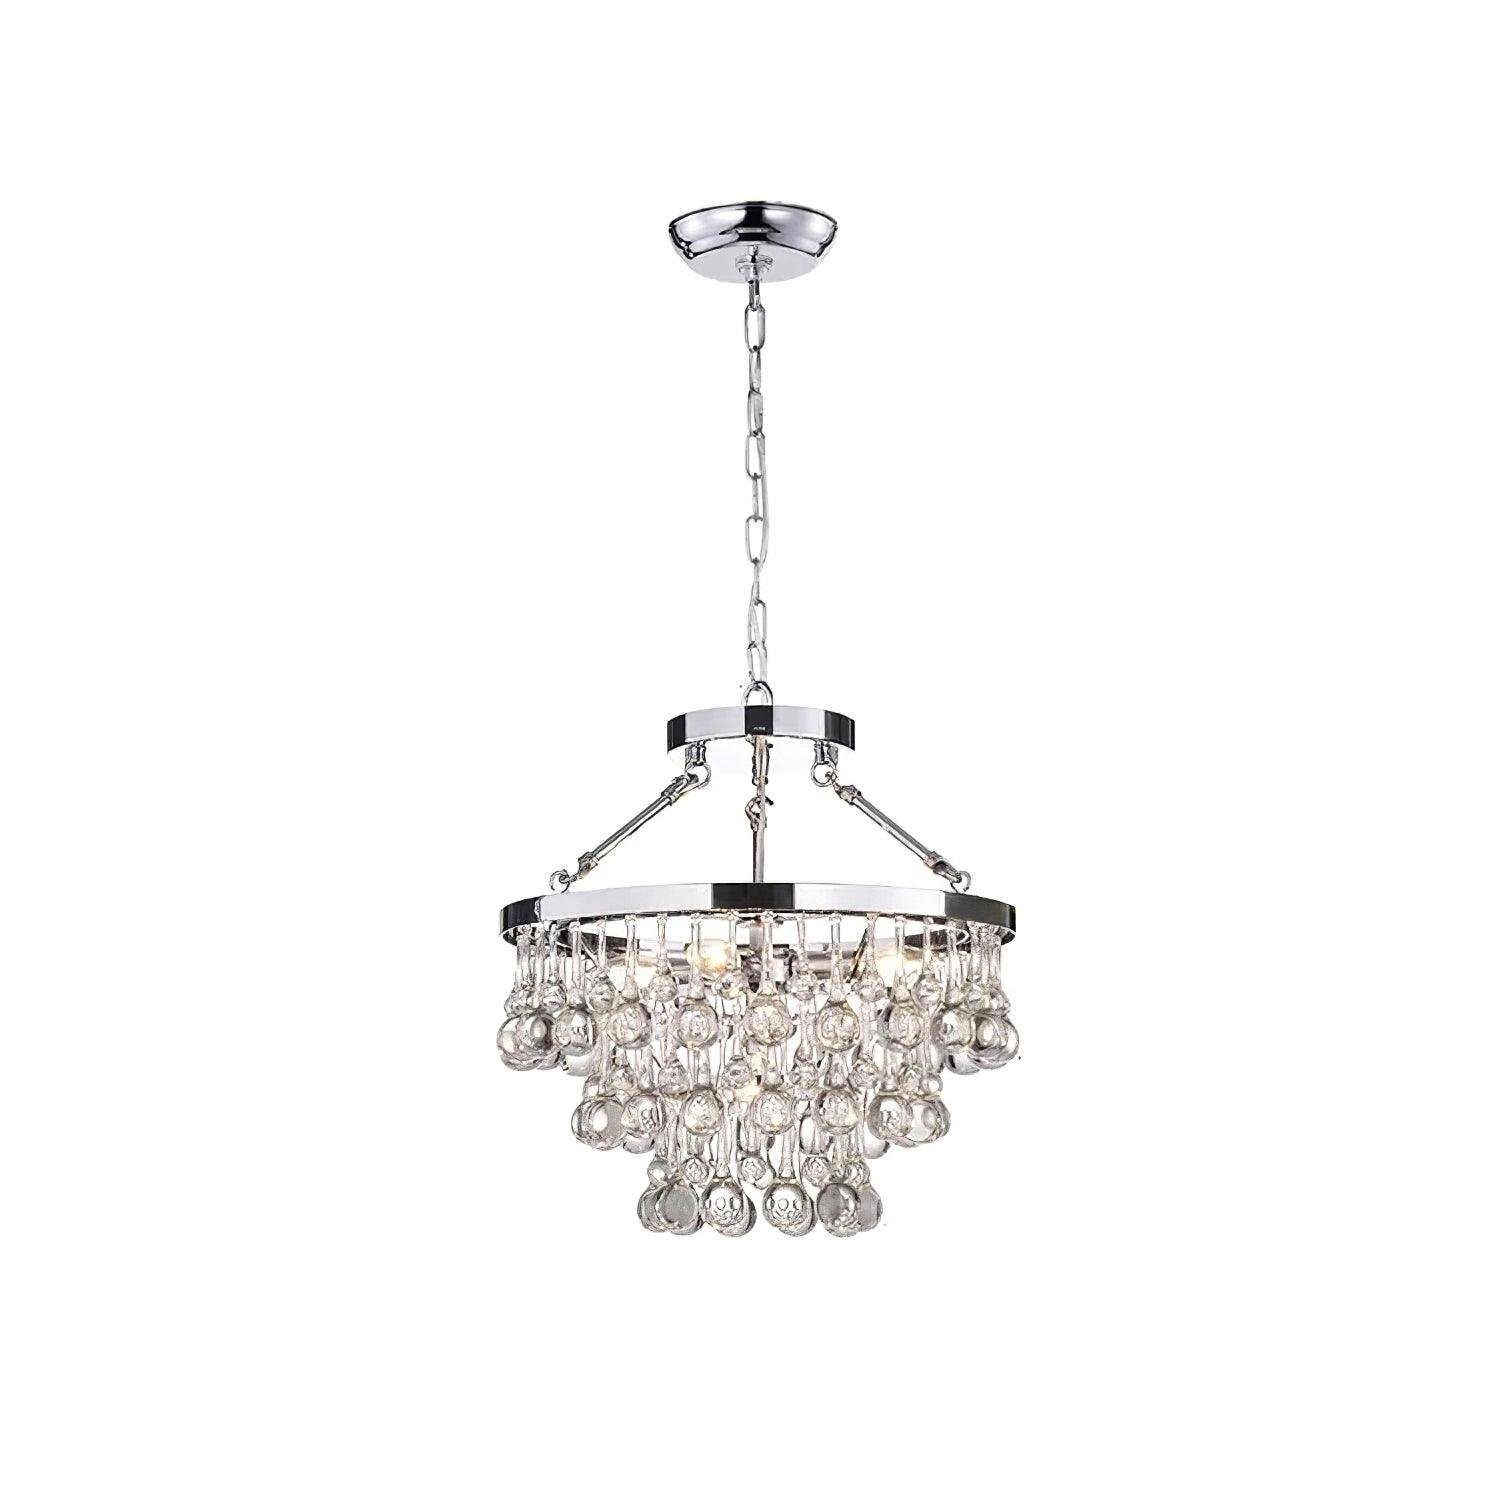 Unique Tiered Crystal Chandelier with 4 heads, Chrome finish - Diameter 15.7 inches x Height 15.4 inches (40cm x 39cm)